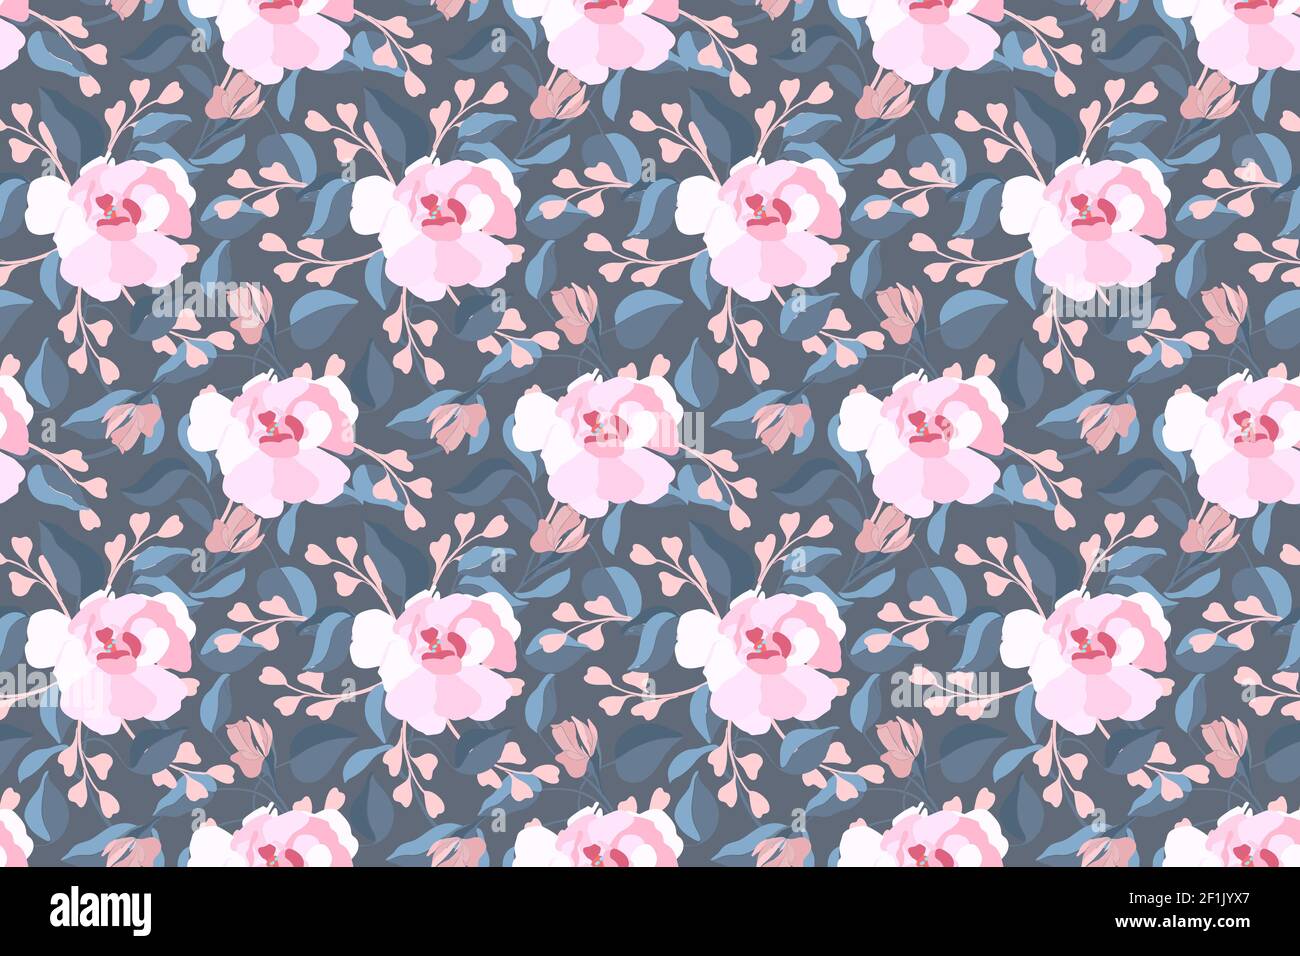 Art floral vector seamless pattern. Pink flowers, blue leaves. Garden flowers, buds isolated on a grey background. Endless pattern. Stock Vector